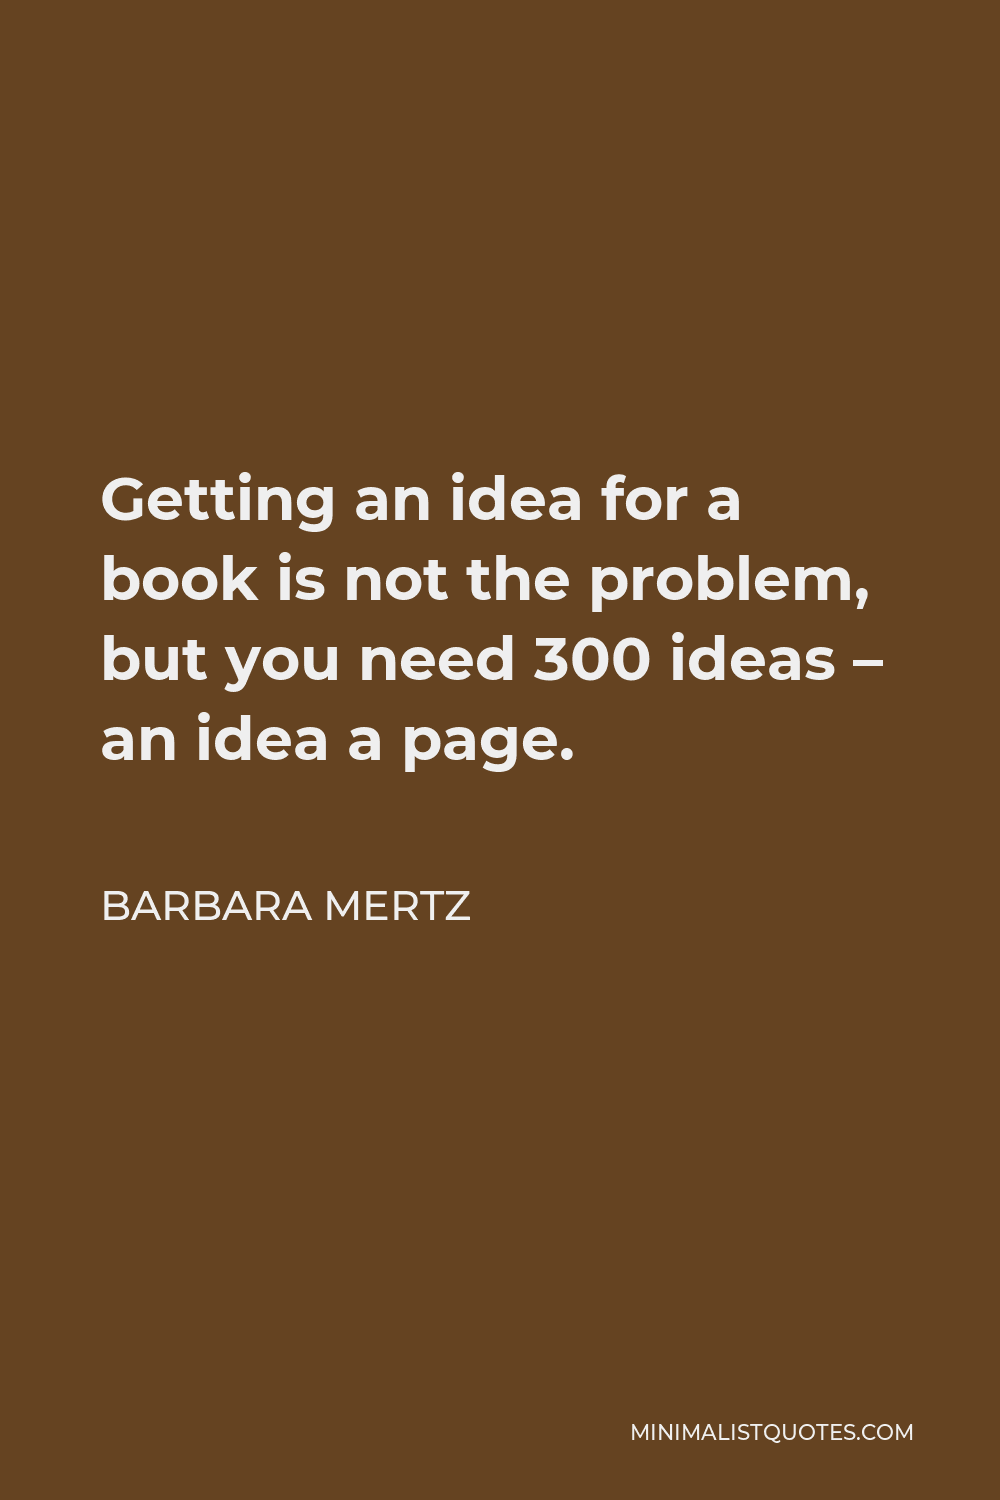 Barbara Mertz Quote - Getting an idea for a book is not the problem, but you need 300 ideas – an idea a page.